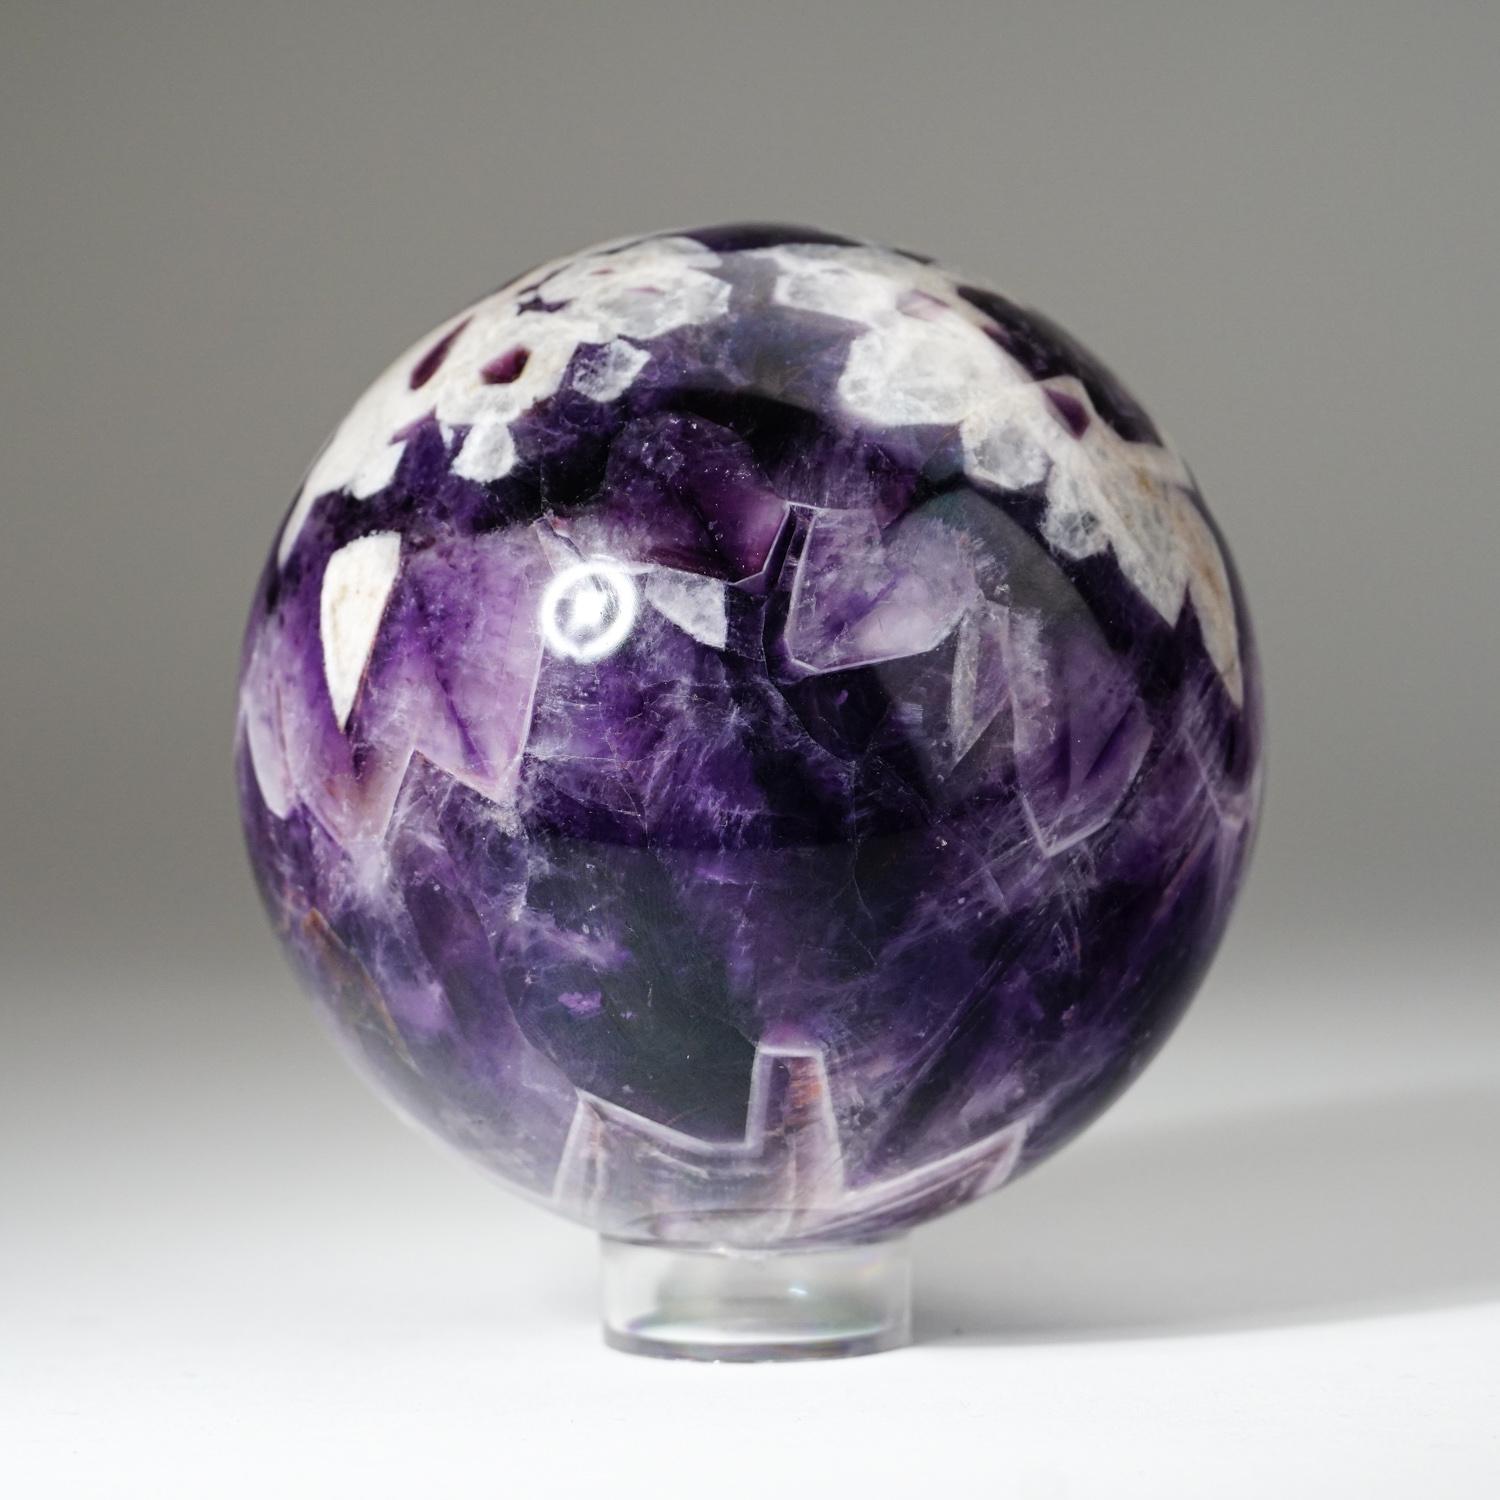 18th Century and Earlier Genuine Polished Chevron Amethyst Sphere from Brazil (3.4lbs) For Sale